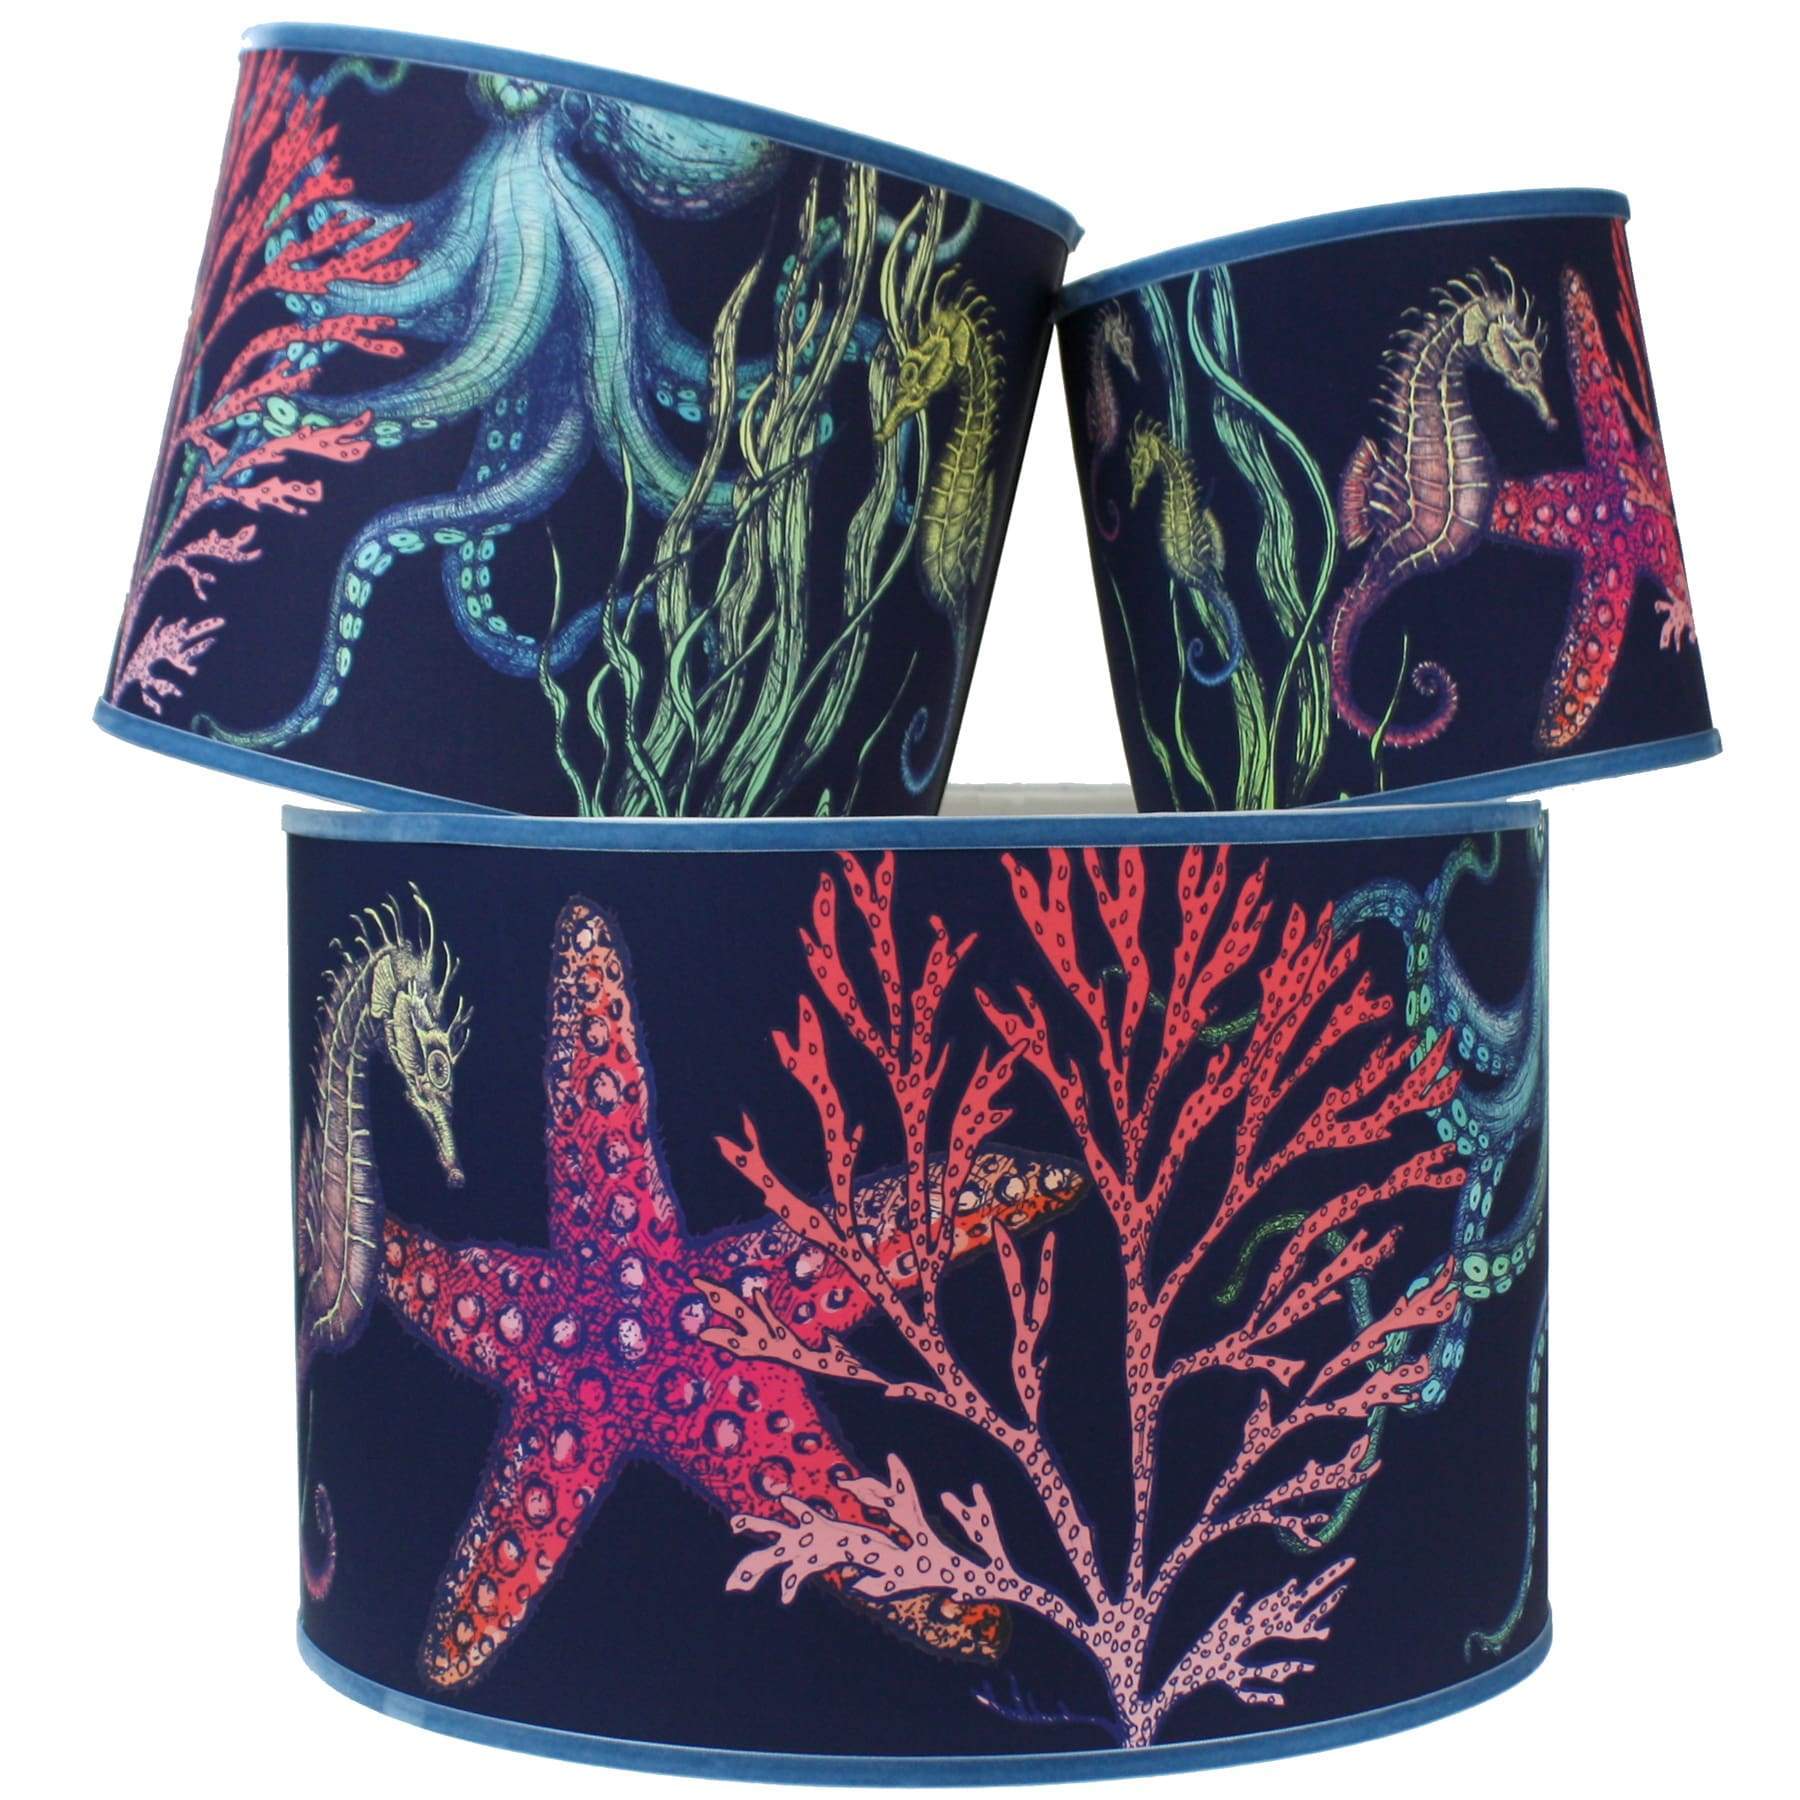 Rainbow Reef Navy Shade With Octopus,Seahorse,Starfish and Seaweed Design in bright colours with a blue trim on the edge of the shade.The lampshades are shown in a stack of three showing all three sizes.